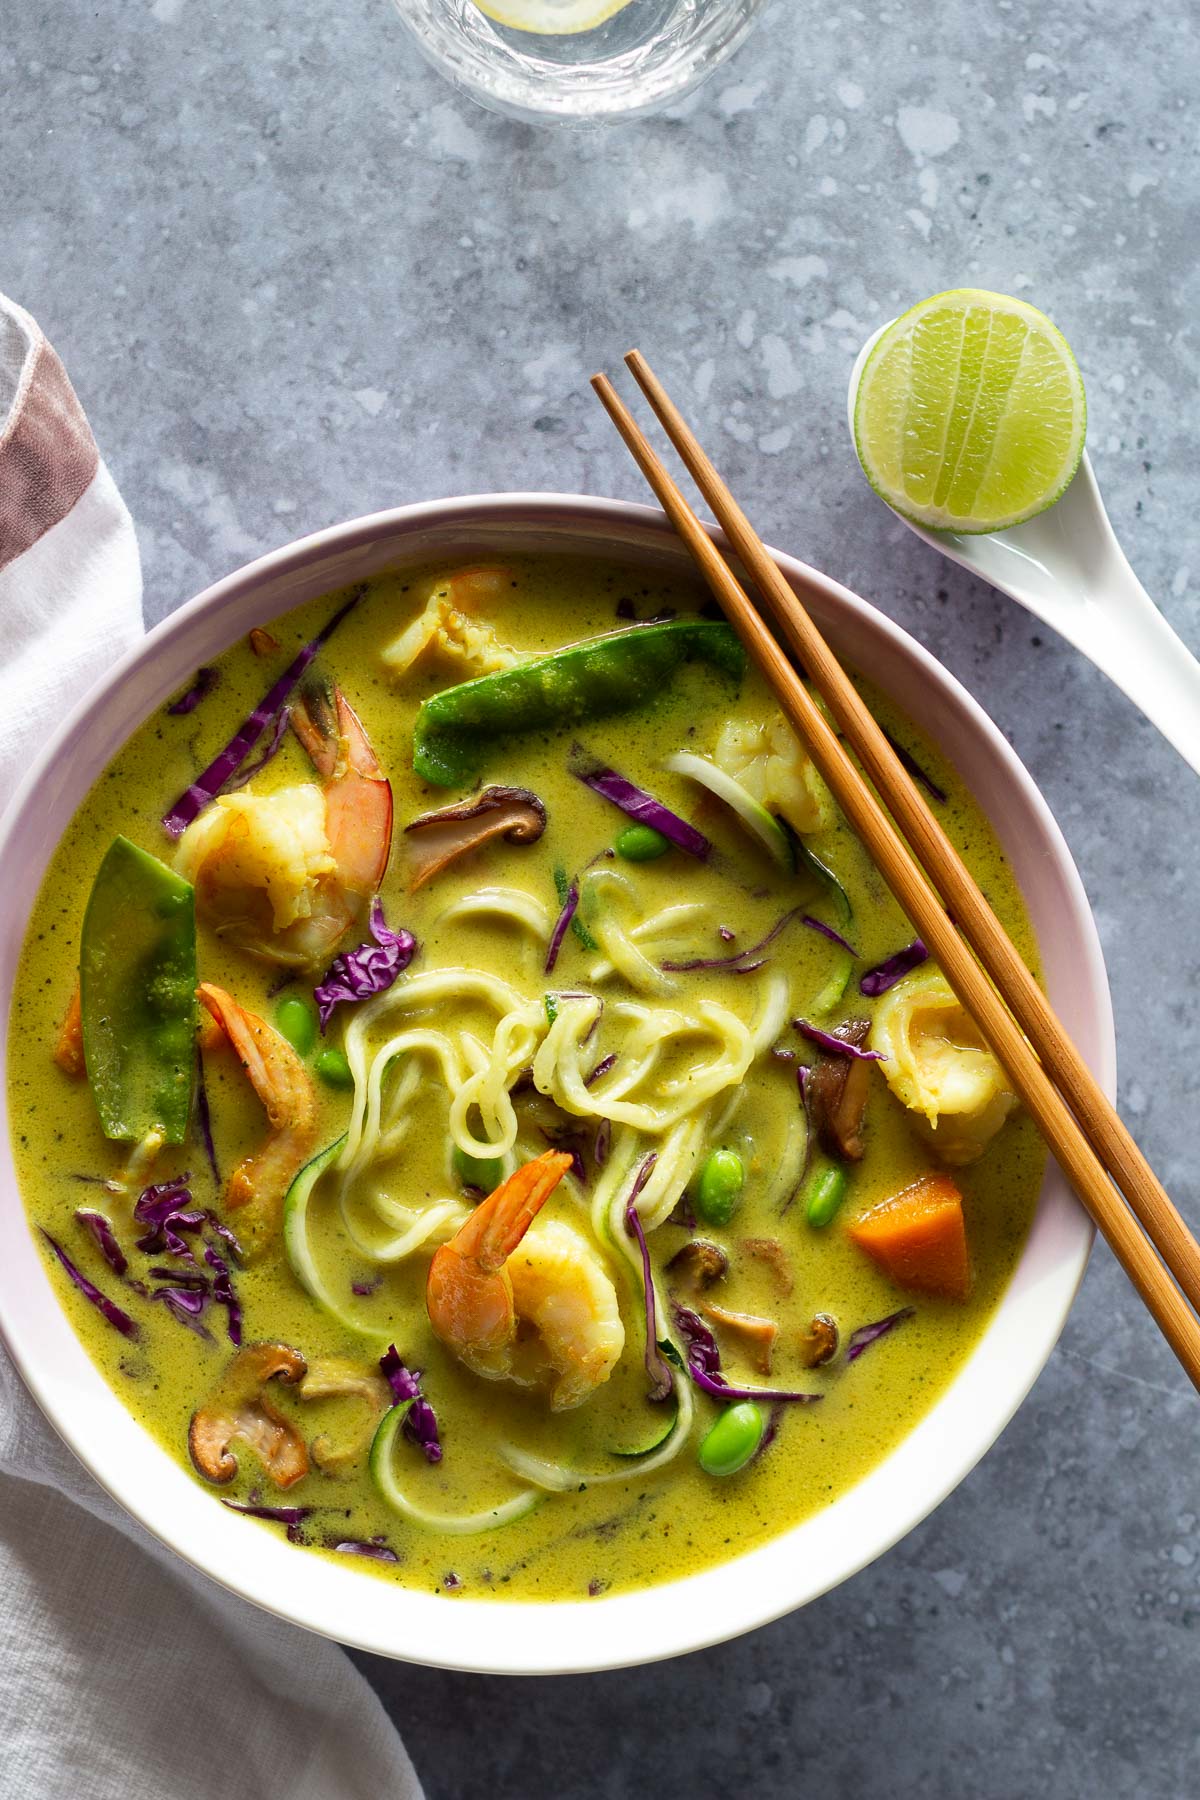 Lemongrass noodle soup packed with tasty veggies, noodles and served with a lime cheek